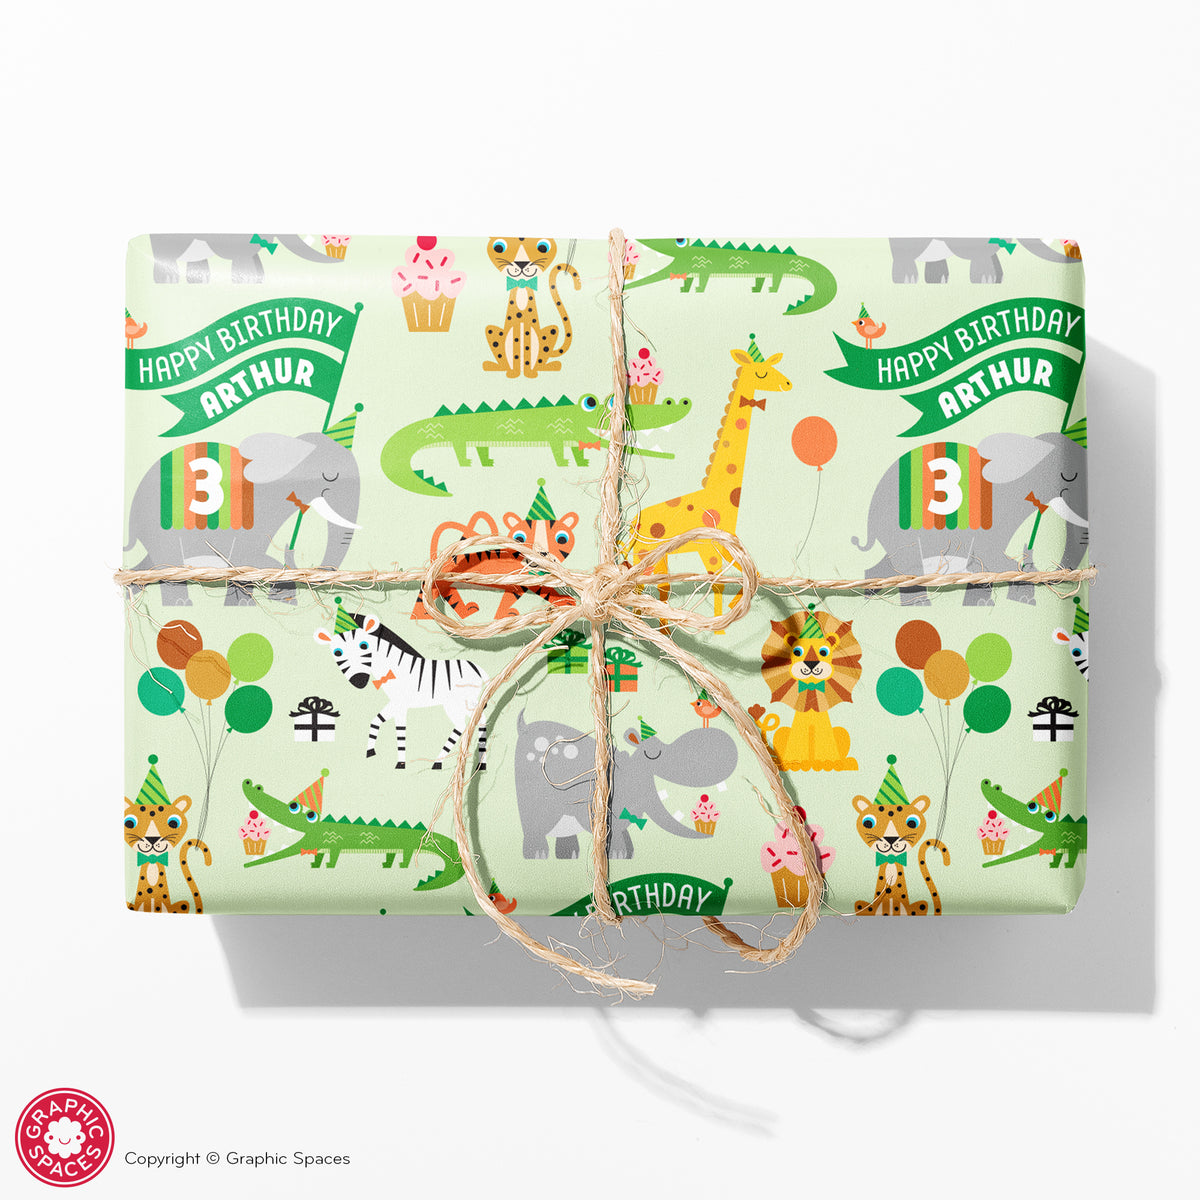 Safari Jungle Animal Party Birthday Personalized Wrapping Paper - GREEN